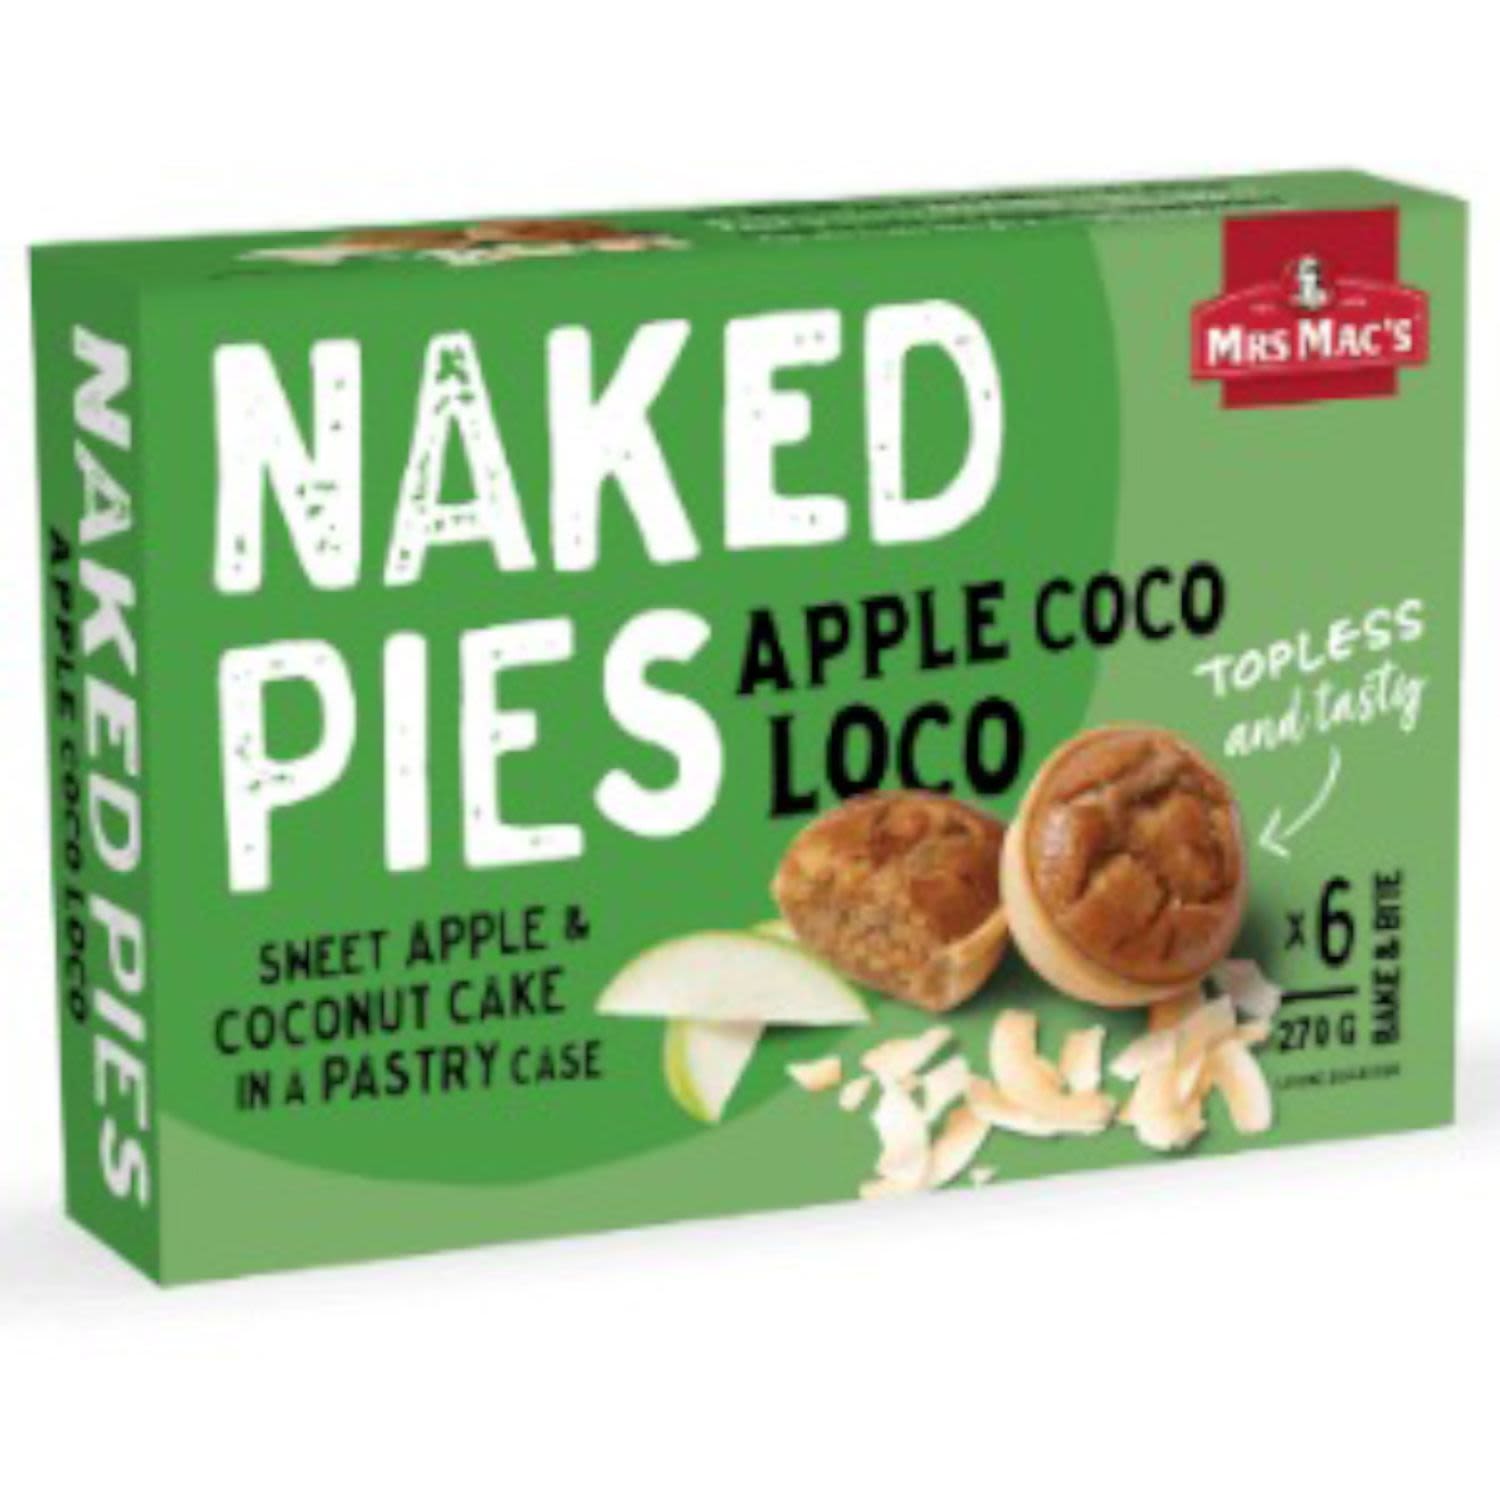 Mrs Mac's Naked Pies Apple Coco Loco, 6 Each